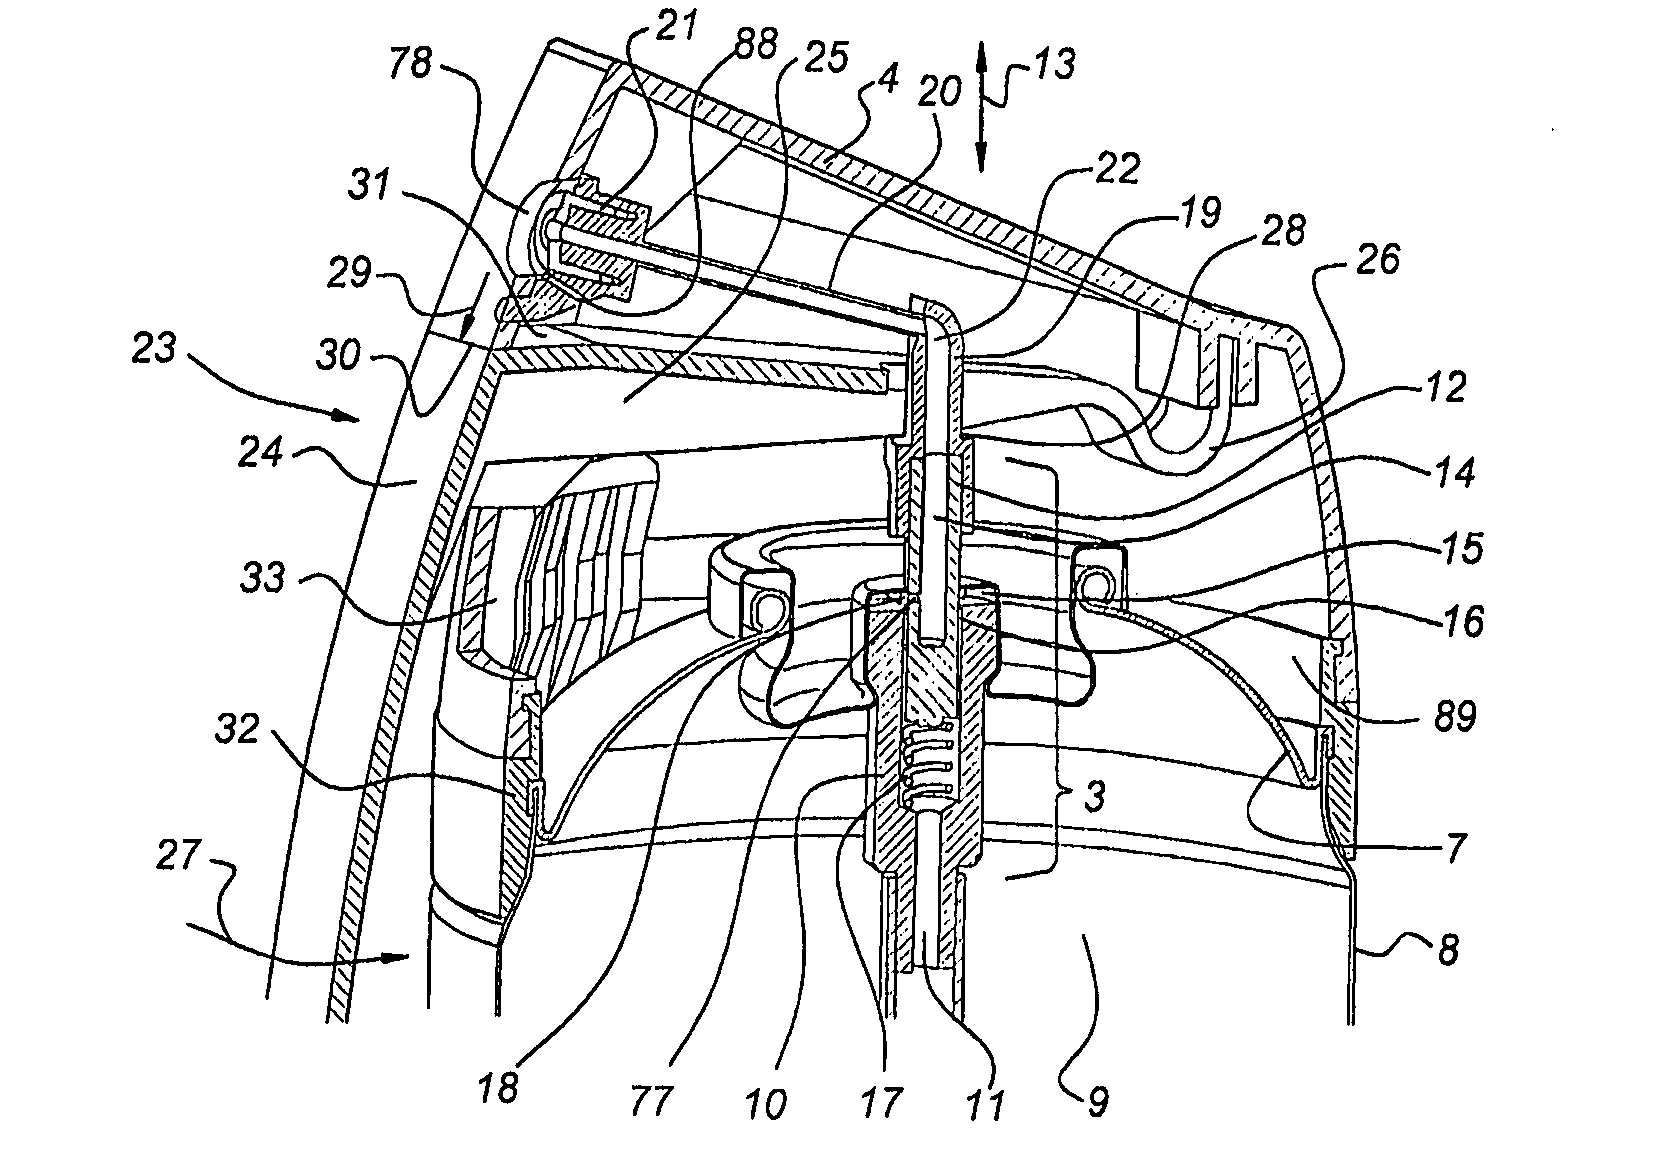 Dispensing Device for Dispensing a Product